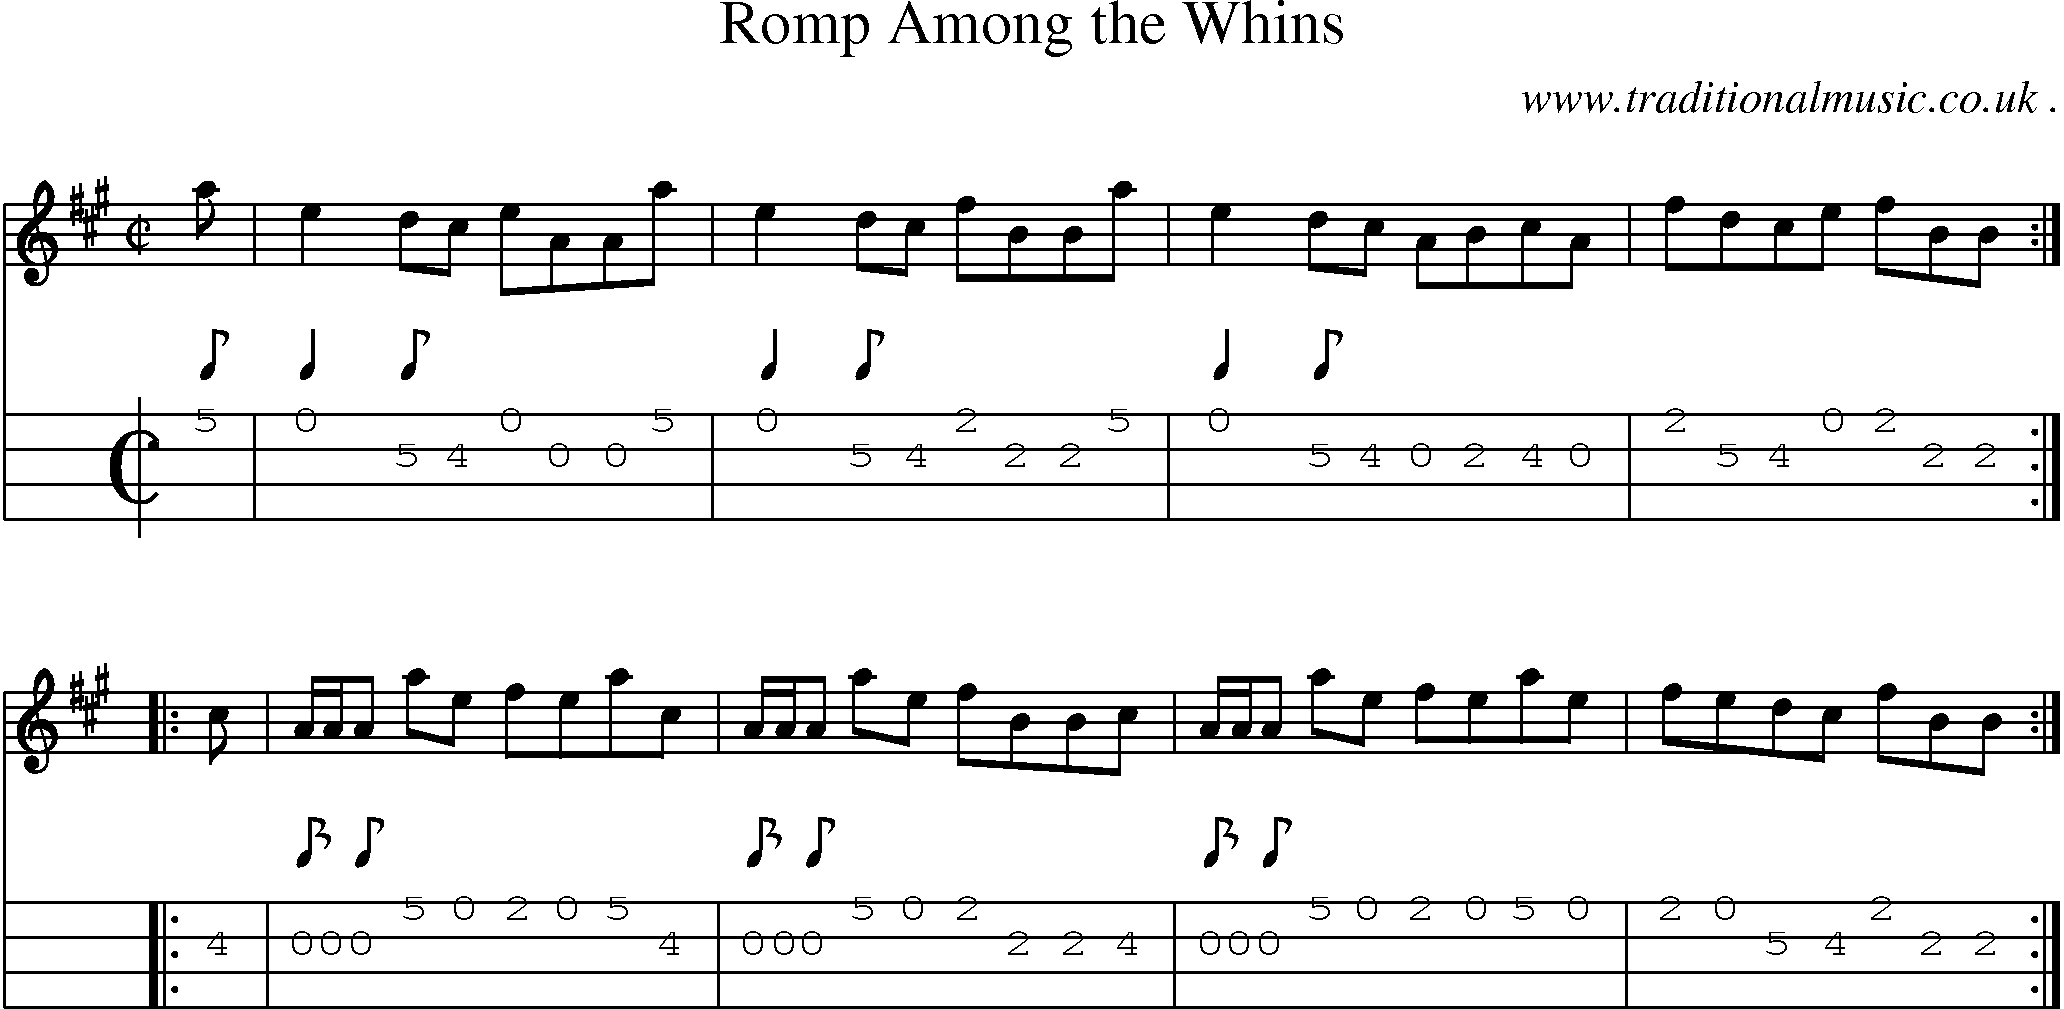 Sheet-music  score, Chords and Mandolin Tabs for Romp Among The Whins